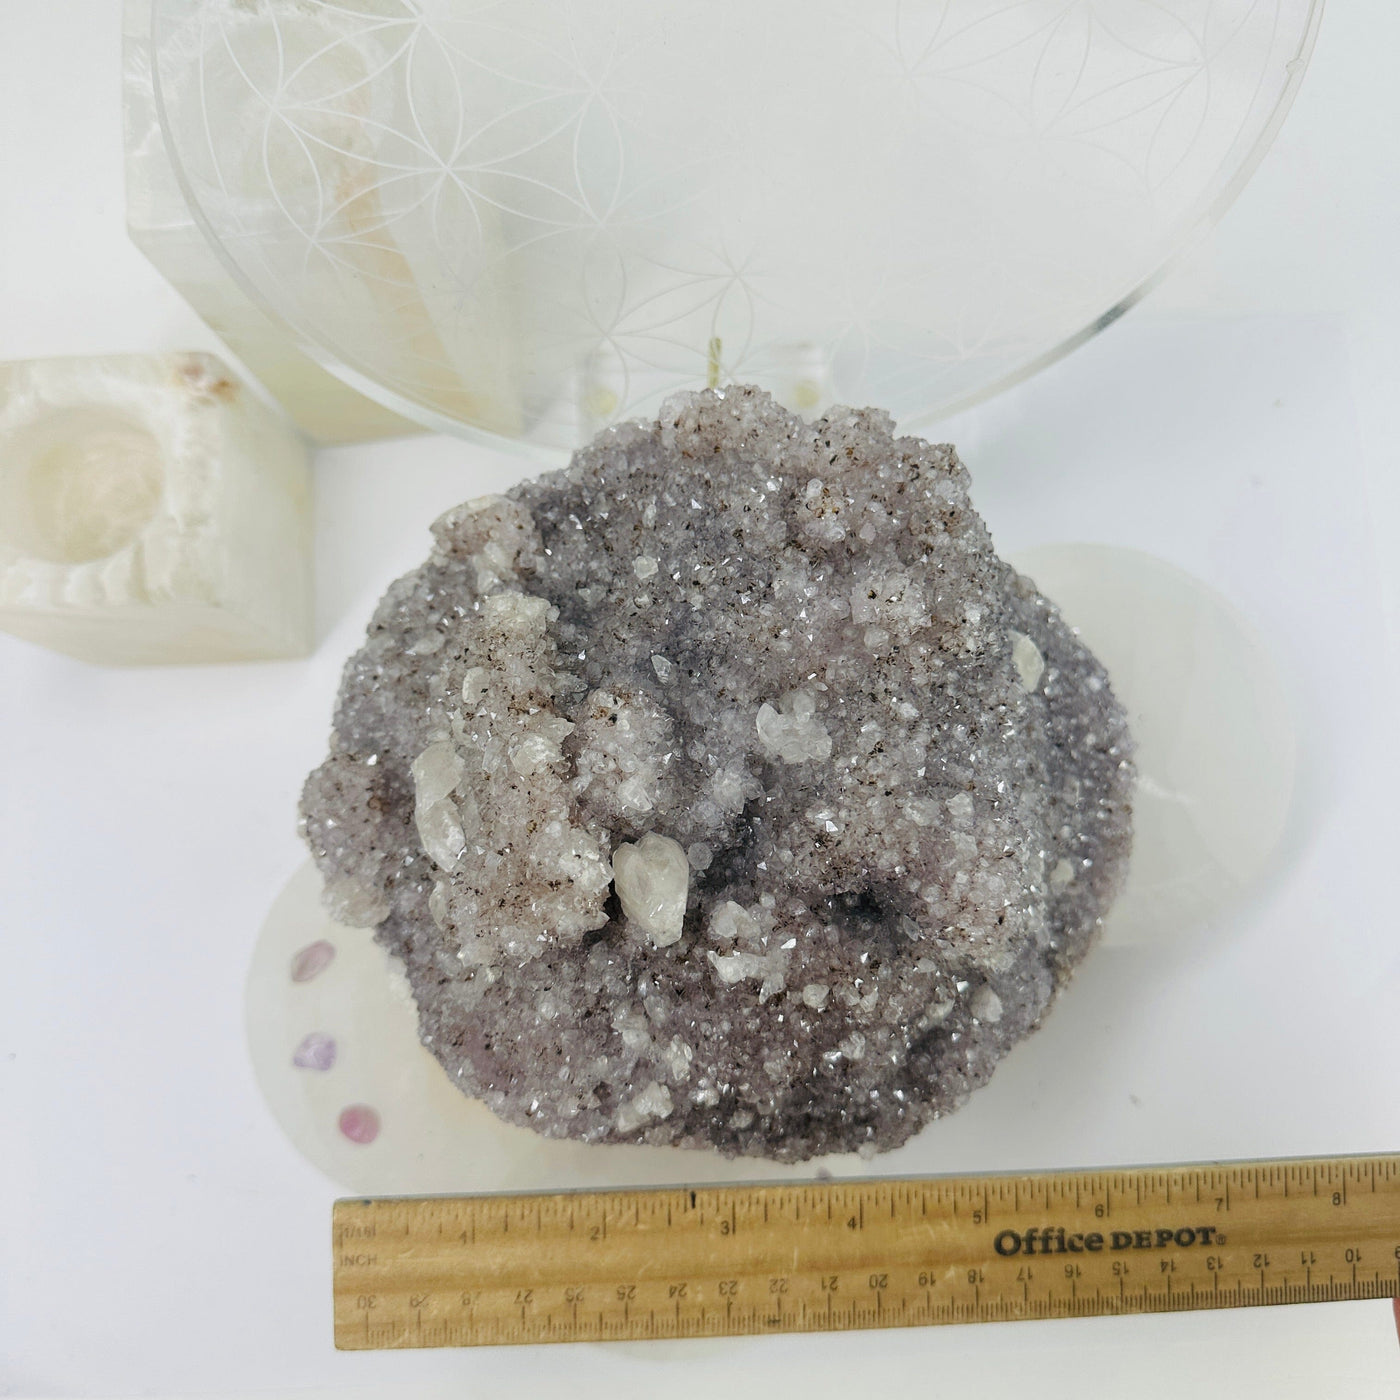 Raw Amethyst Cluster with Mica - light purple amethyst with mica and calcite top view with ruler for size reference